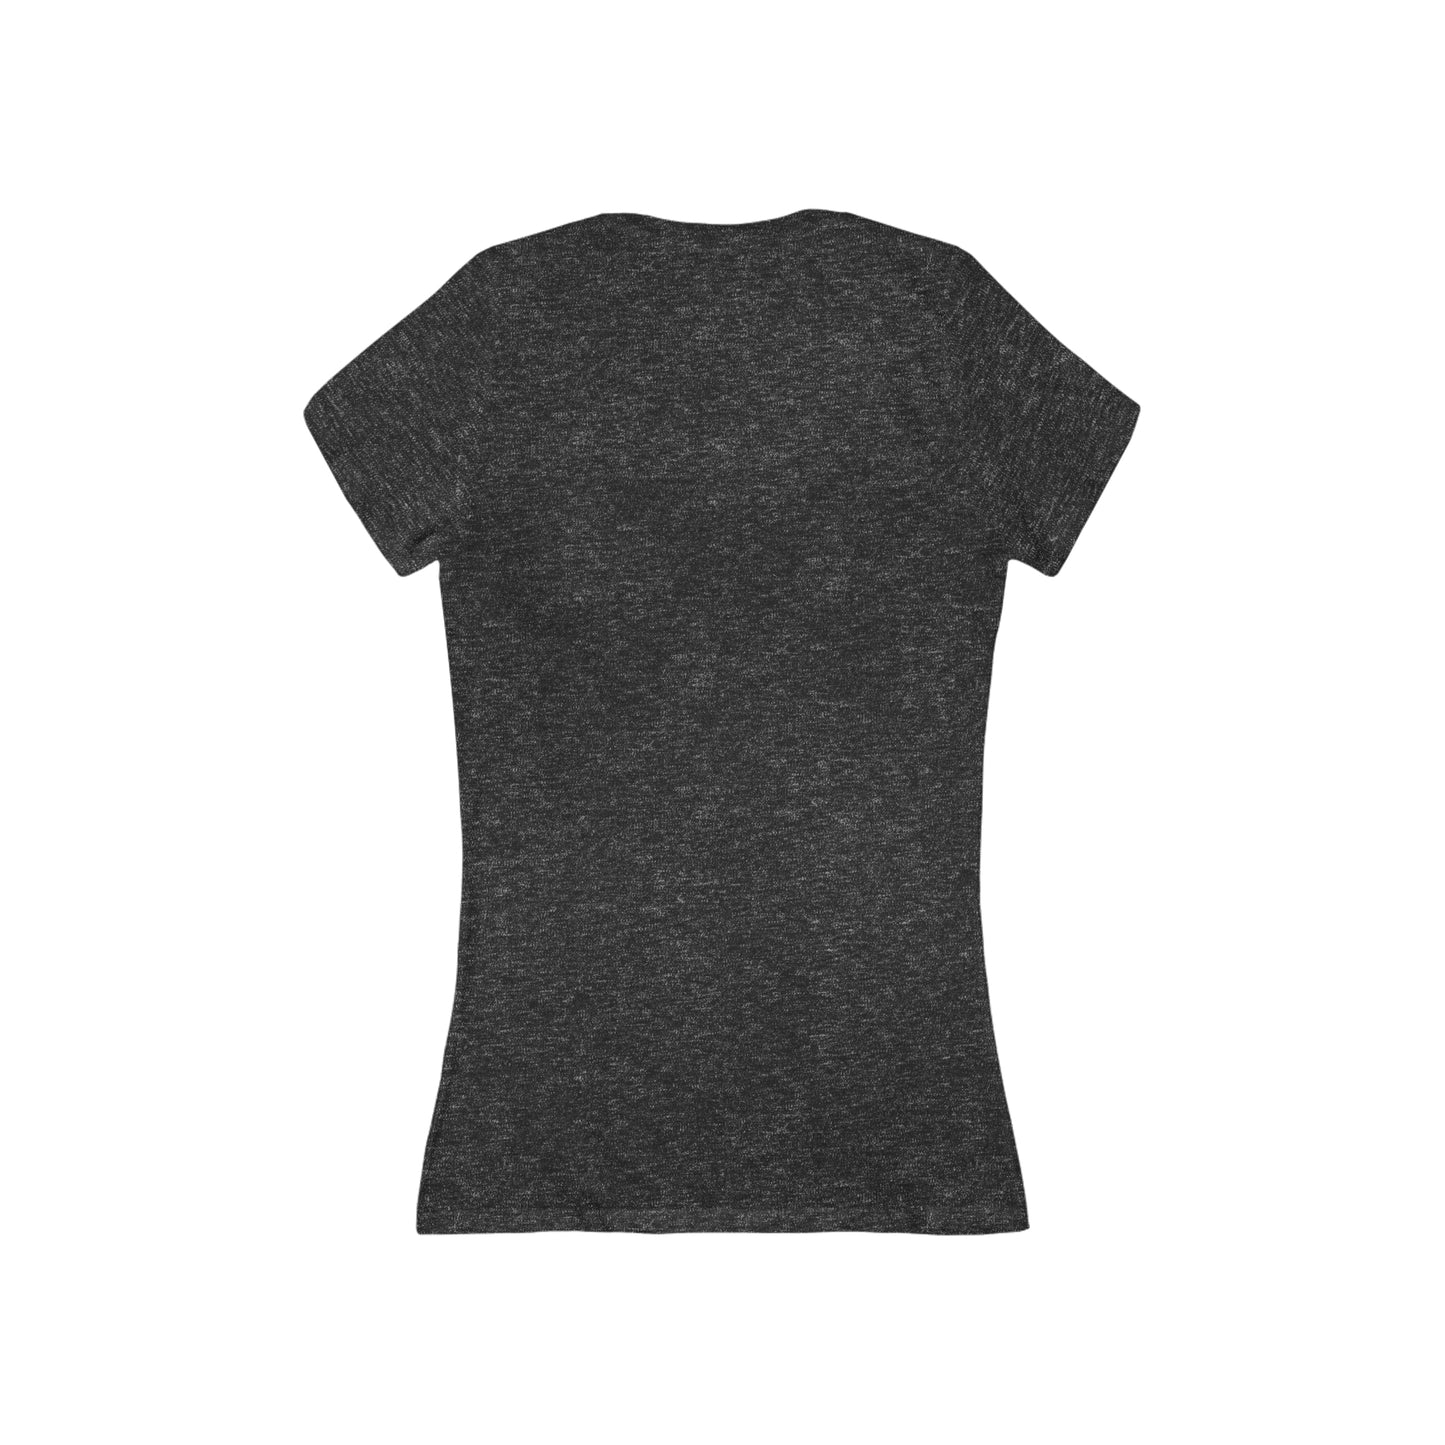 Silver is the new black, short sleeve deep v-neck t-shirt, for women embracing silver and gray hair